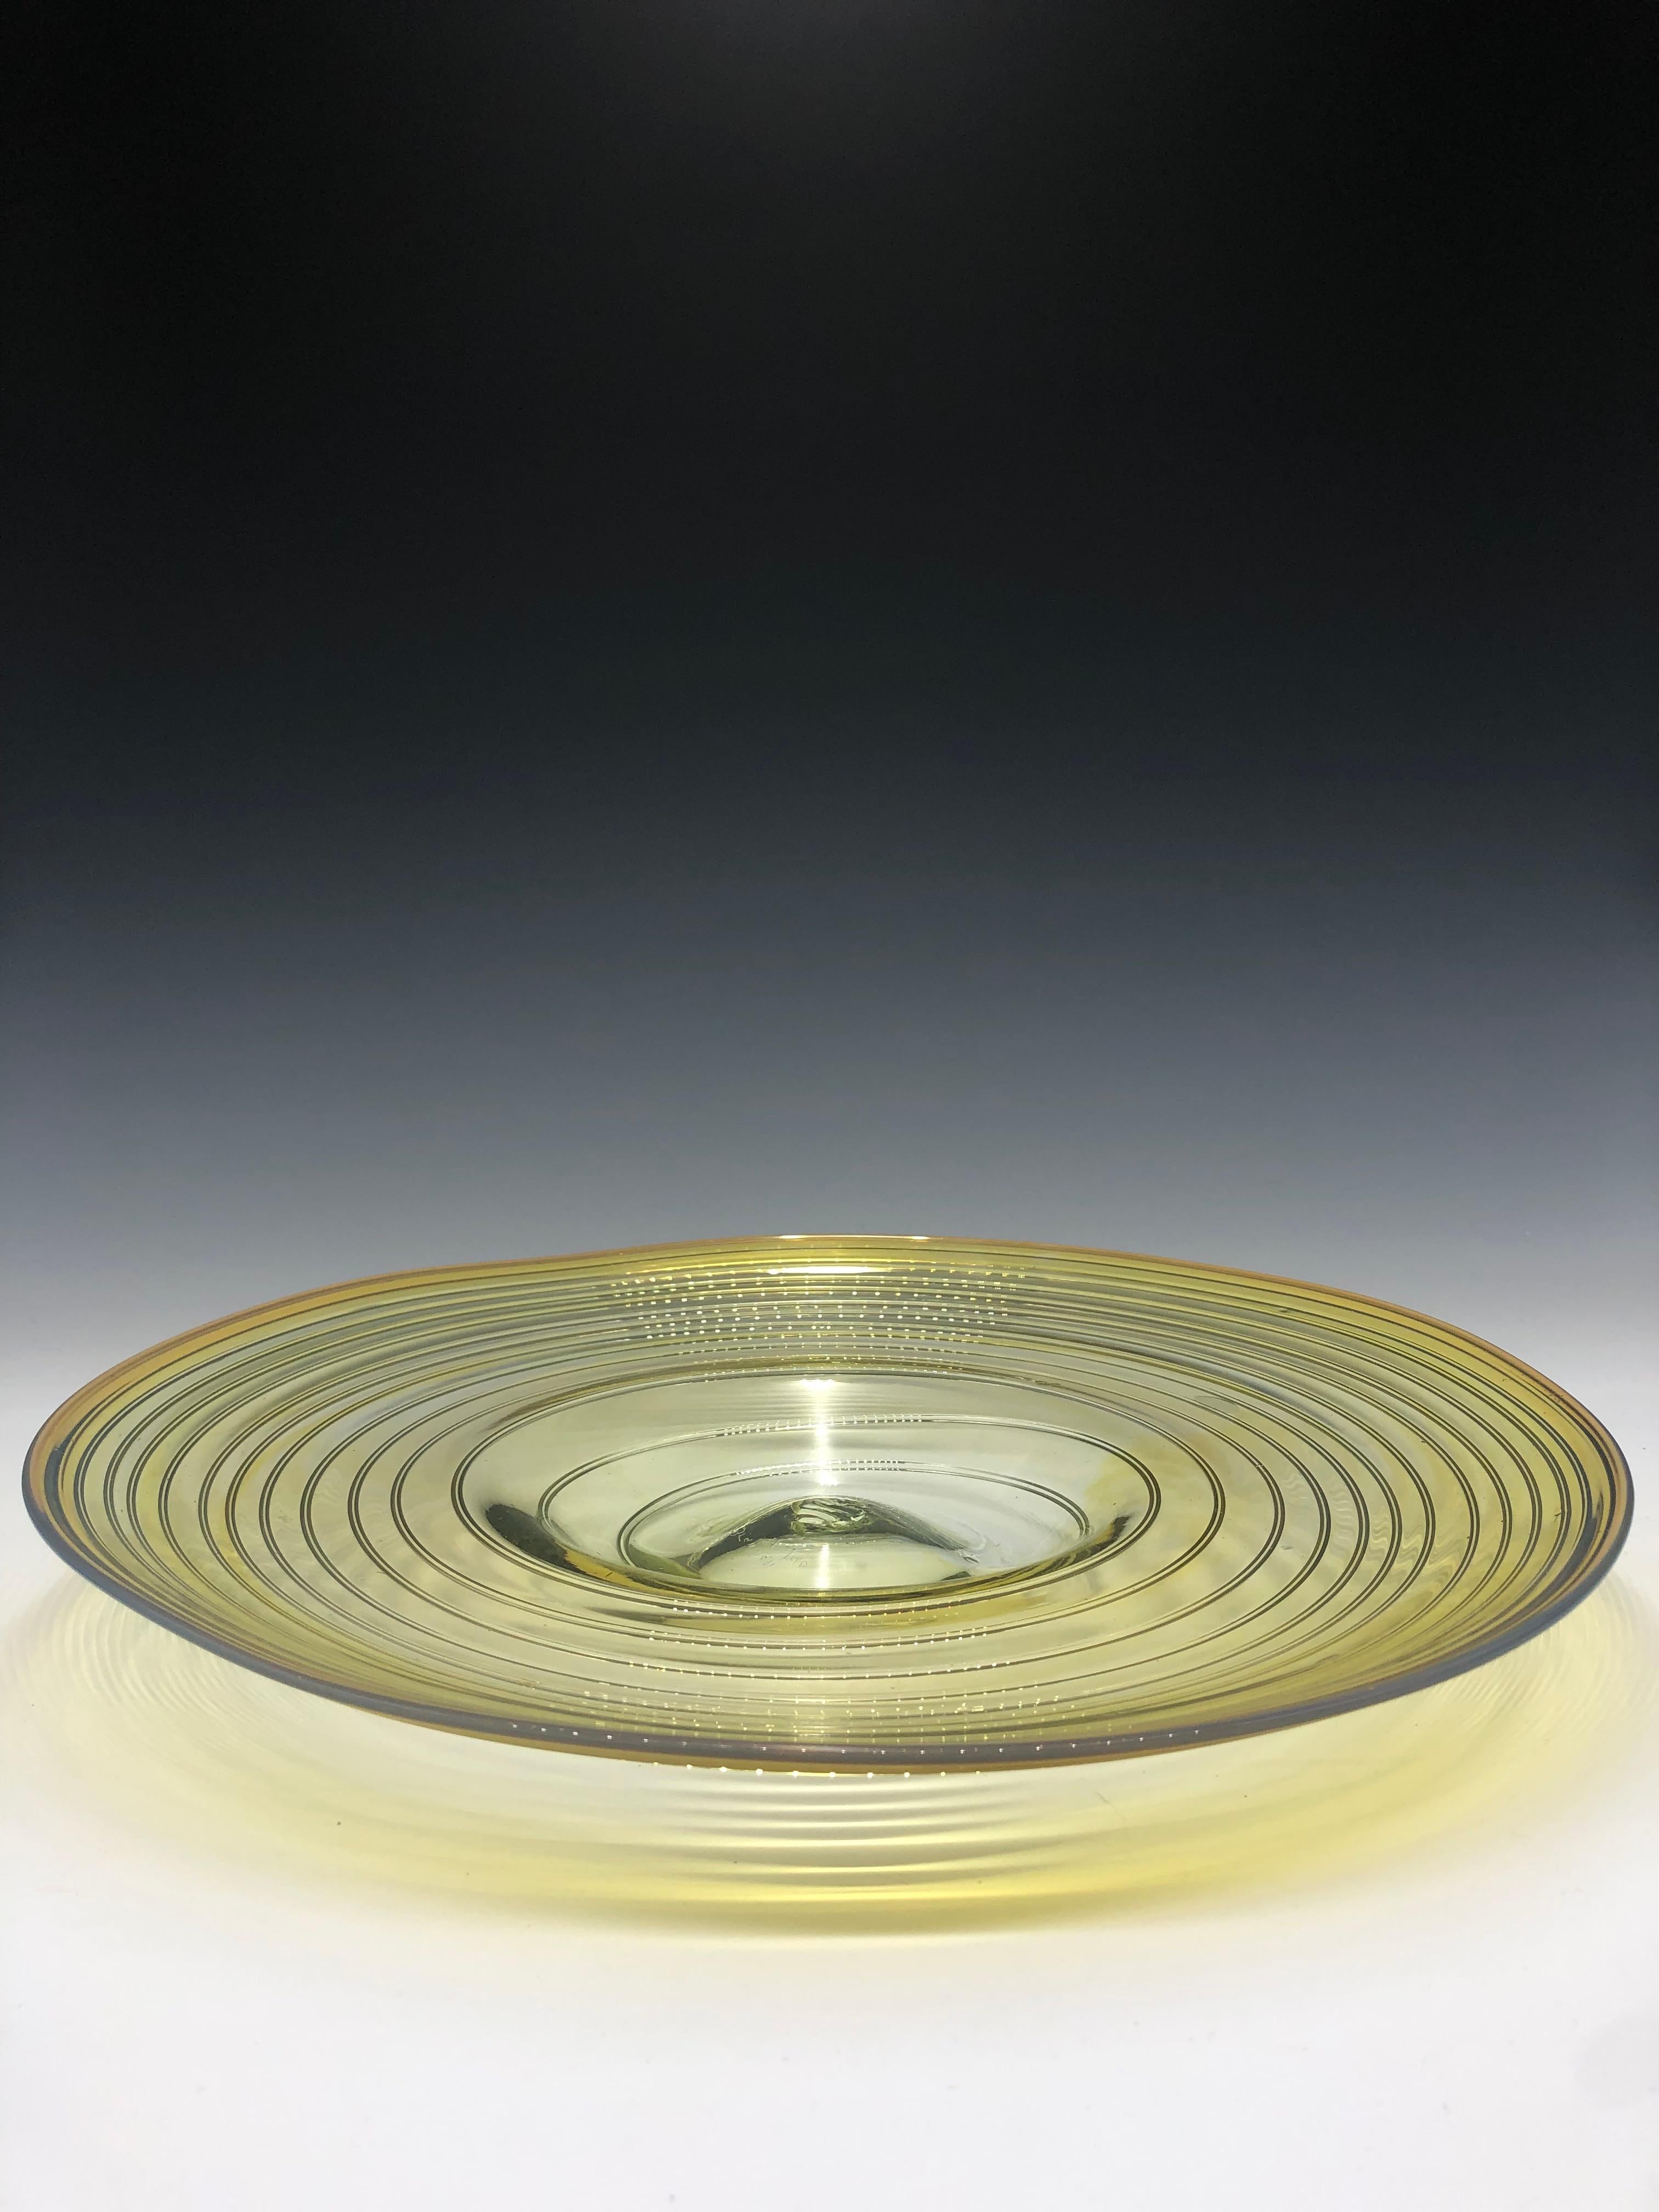 Beautiful yellow glass centerpiece created by Peter Bramhall, signed and dated 8/2/80. The swirl design platter is uniquely shaped and is fully hand-blown, leaving a subtle pontil mark on its base. The glass itself is a stunning clear yellow with a